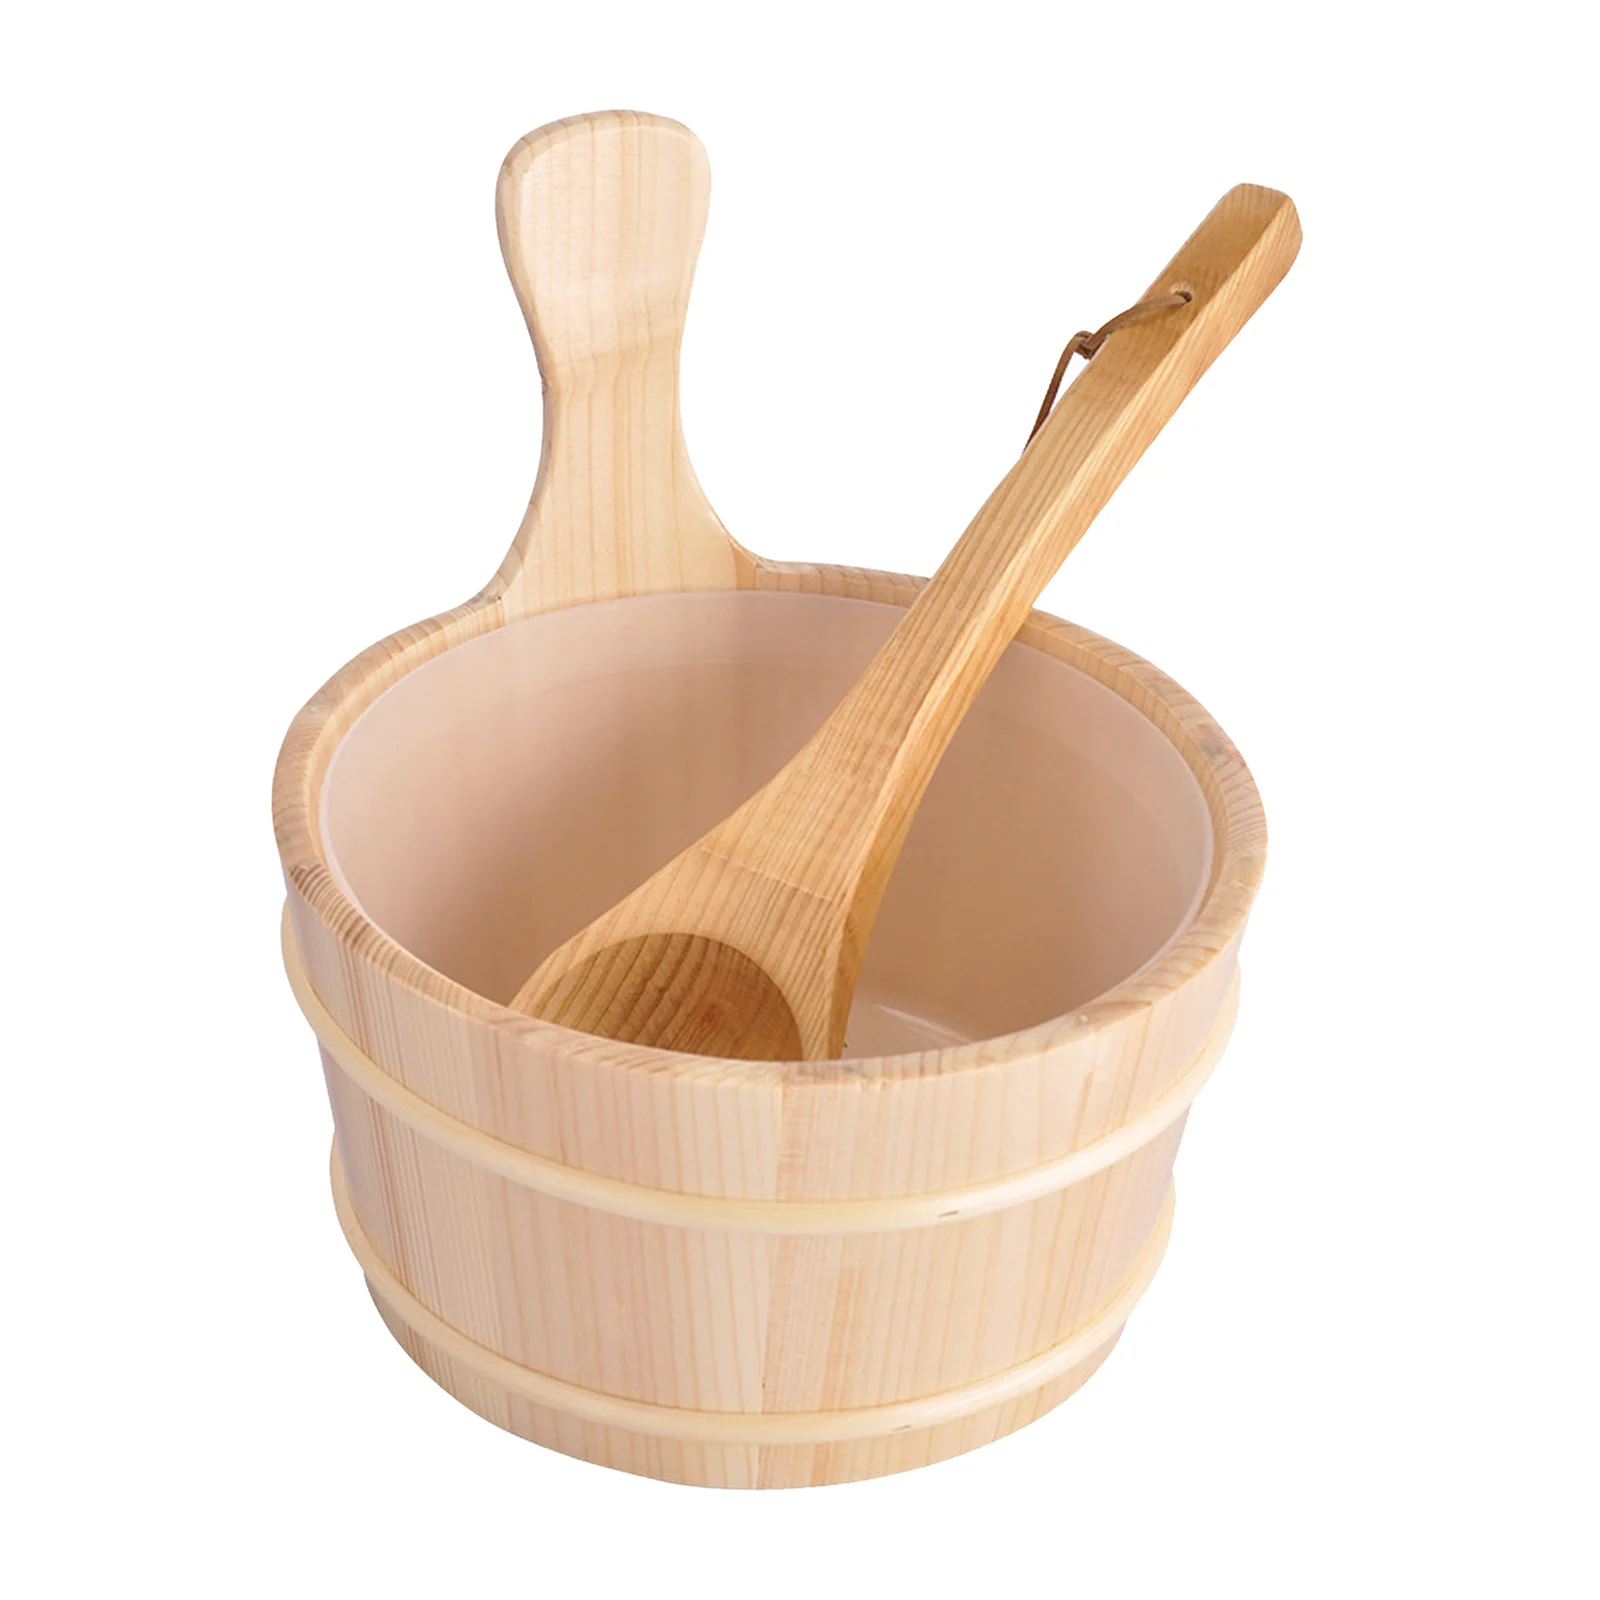 4L Sauna Large Capacity Wooden Bucket And Ladle Kit Steaming Bathroom Equipment Accessories For Sauna Room Tools